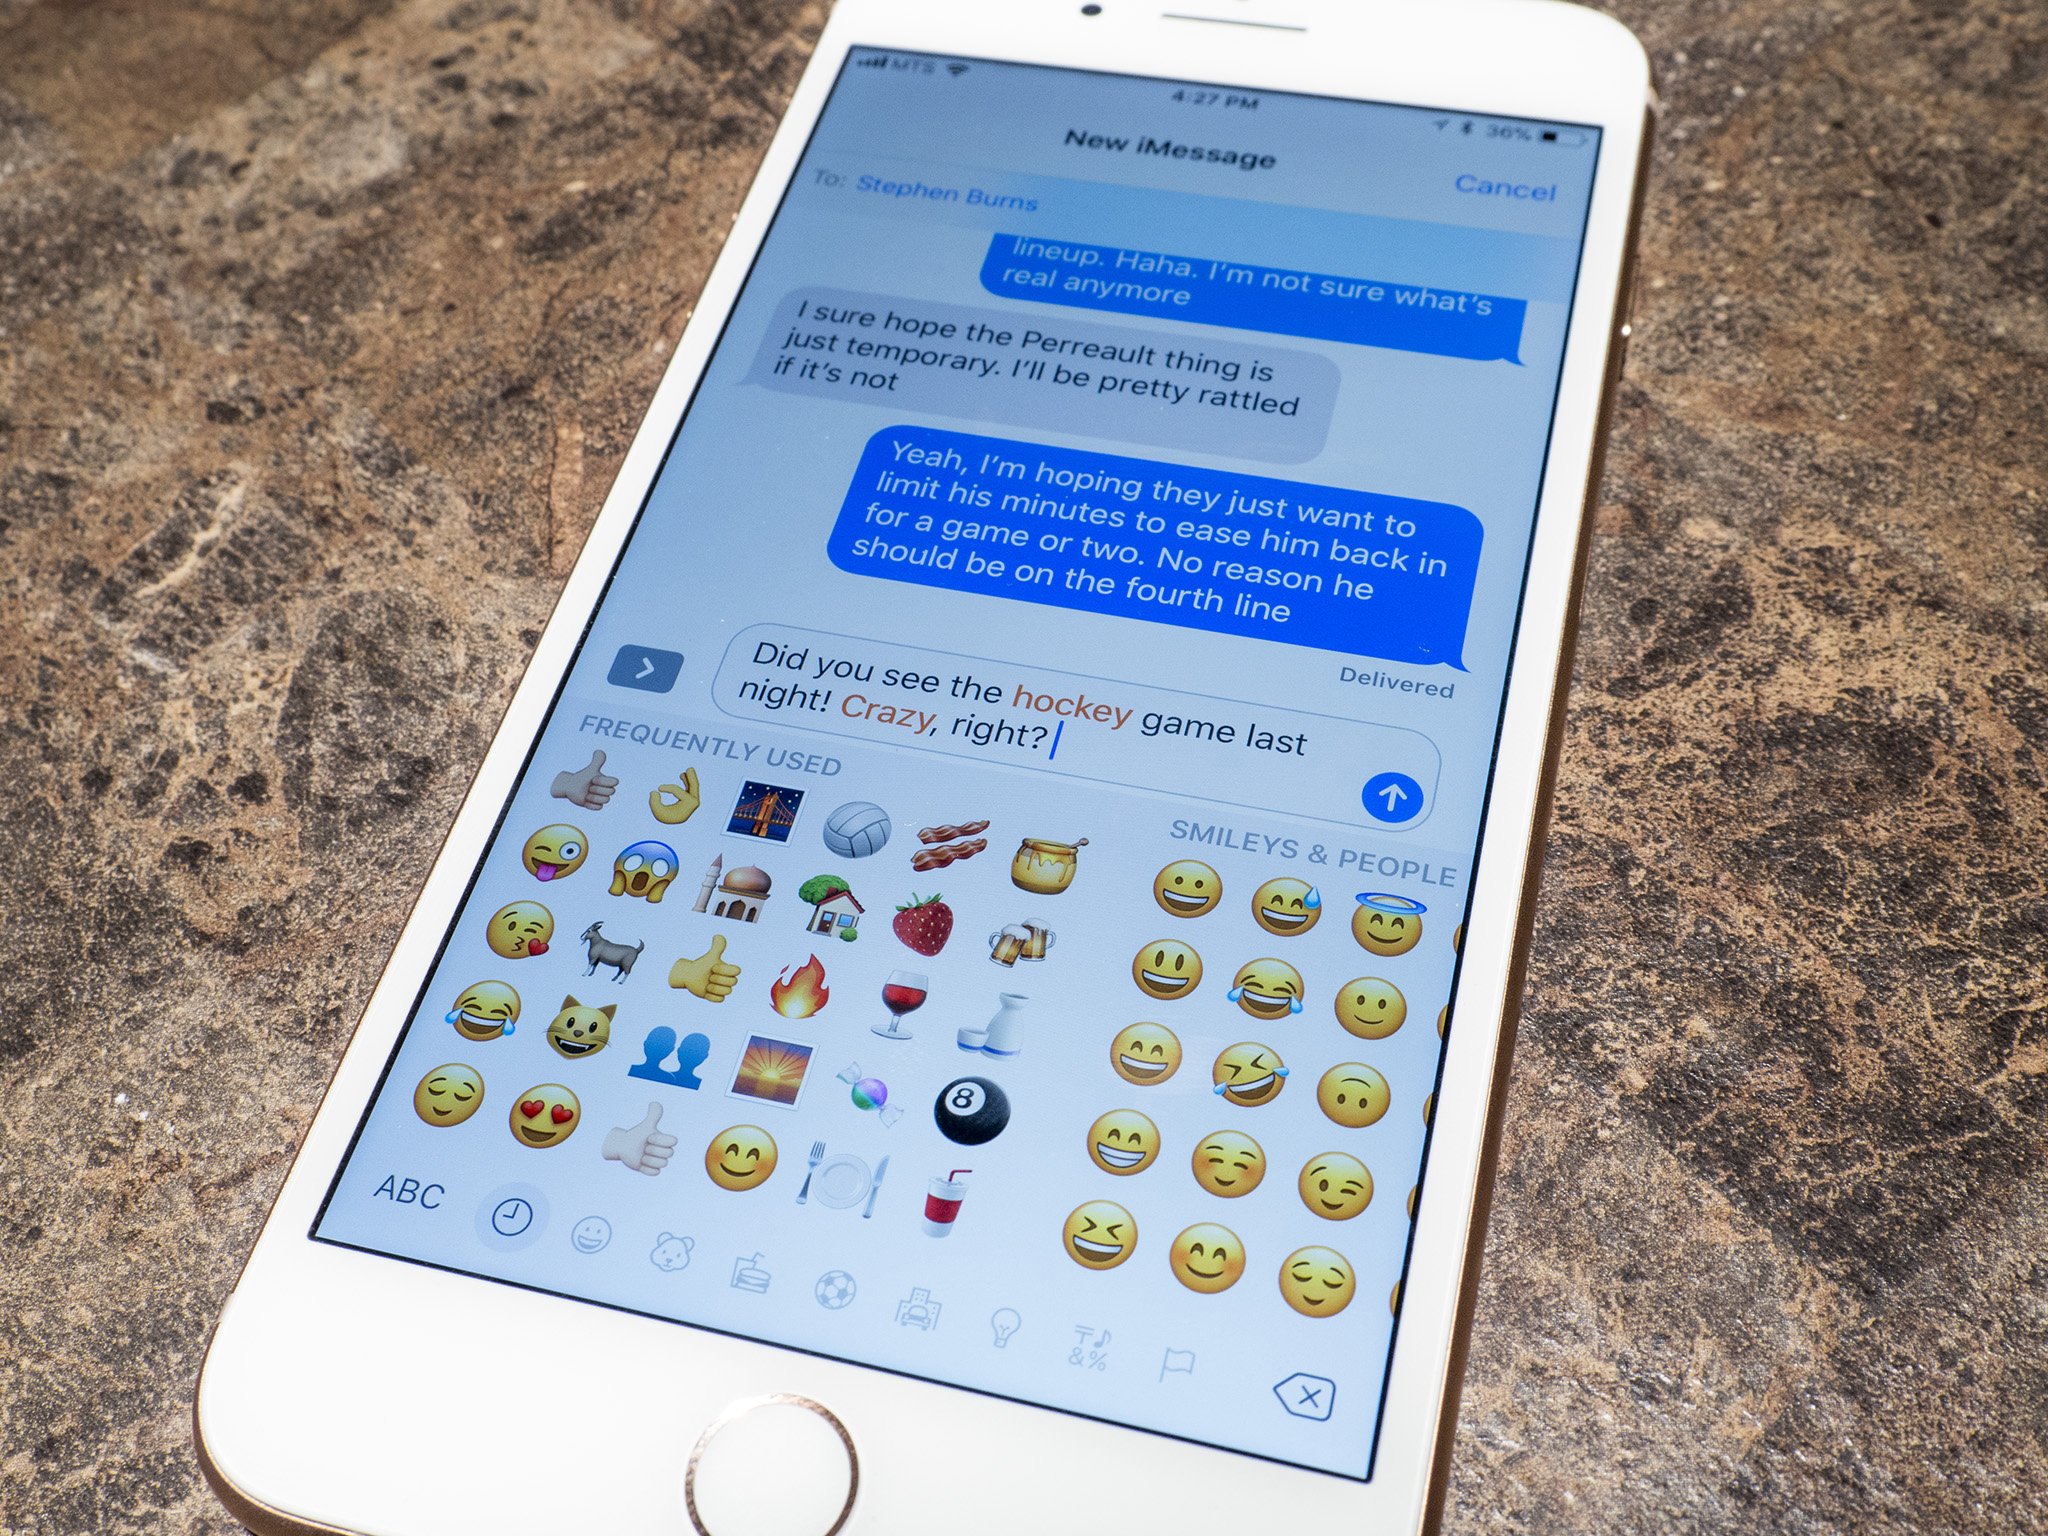 How To Use Emoji And Tapbacks In Messages On Iphone And Ipad | Imore